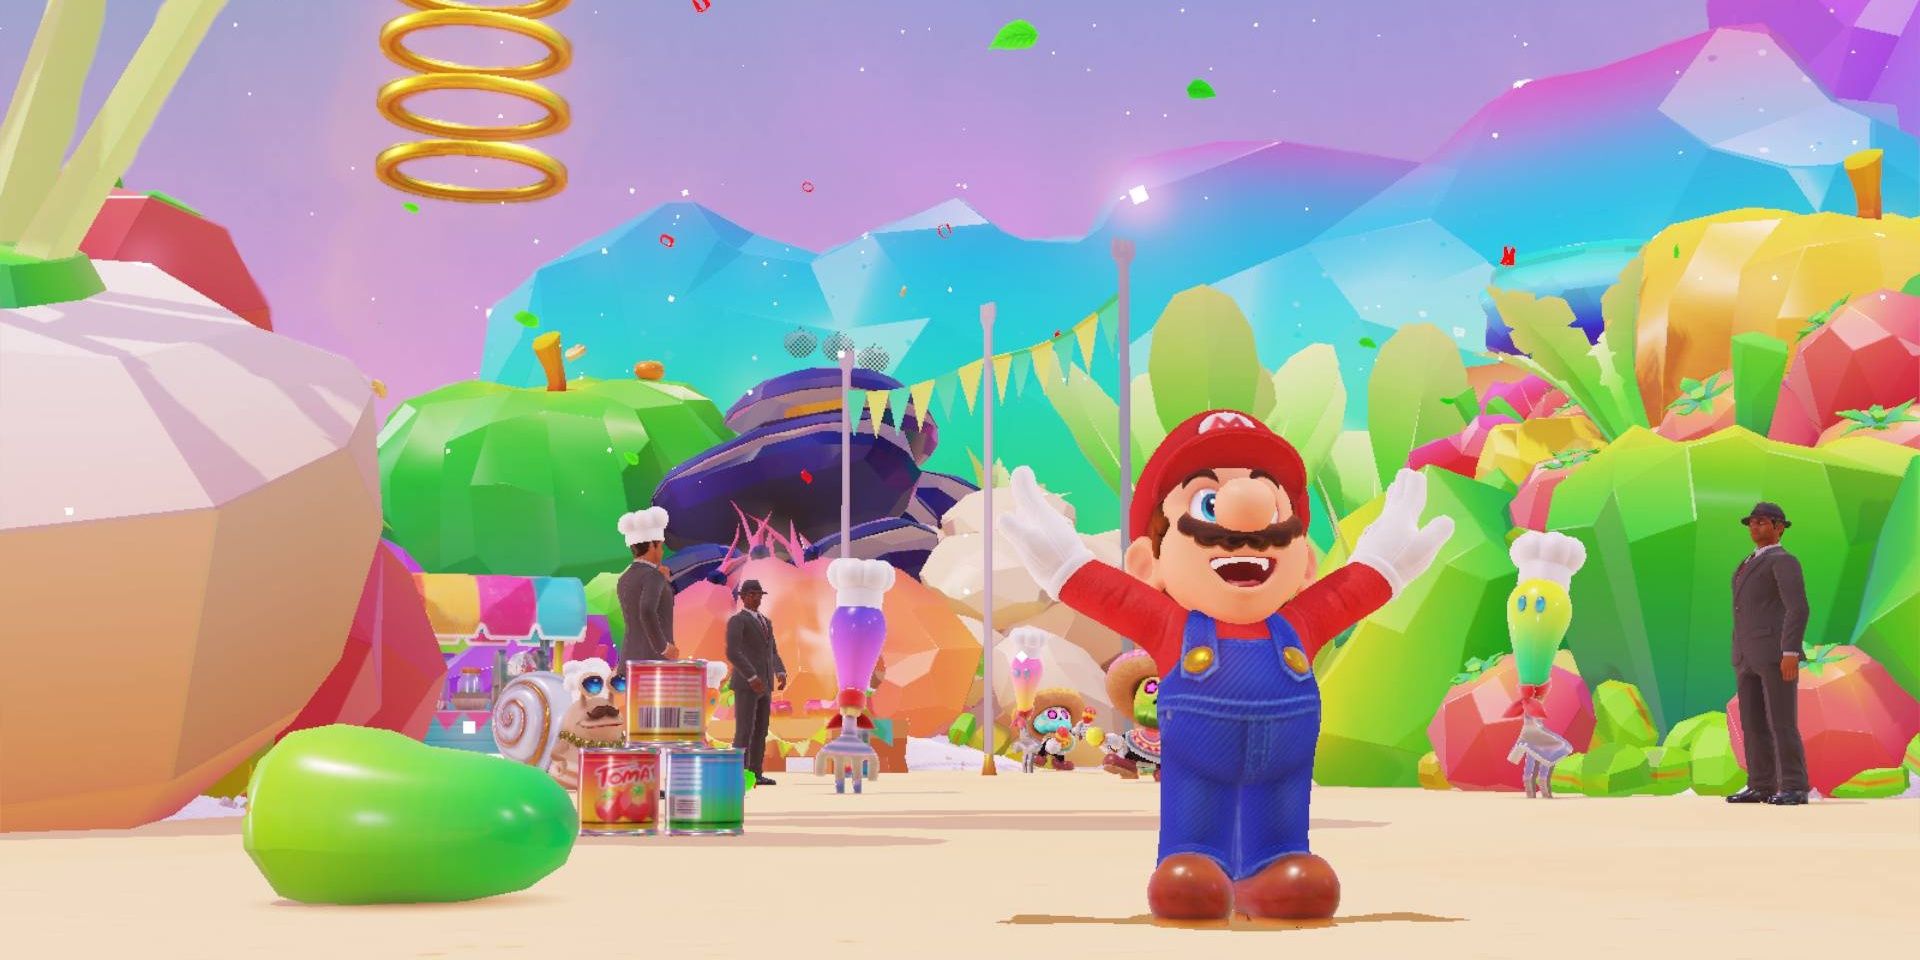 Mario landing a jump at the Luncheon Kingdom celebration in Super Mario Odyssey